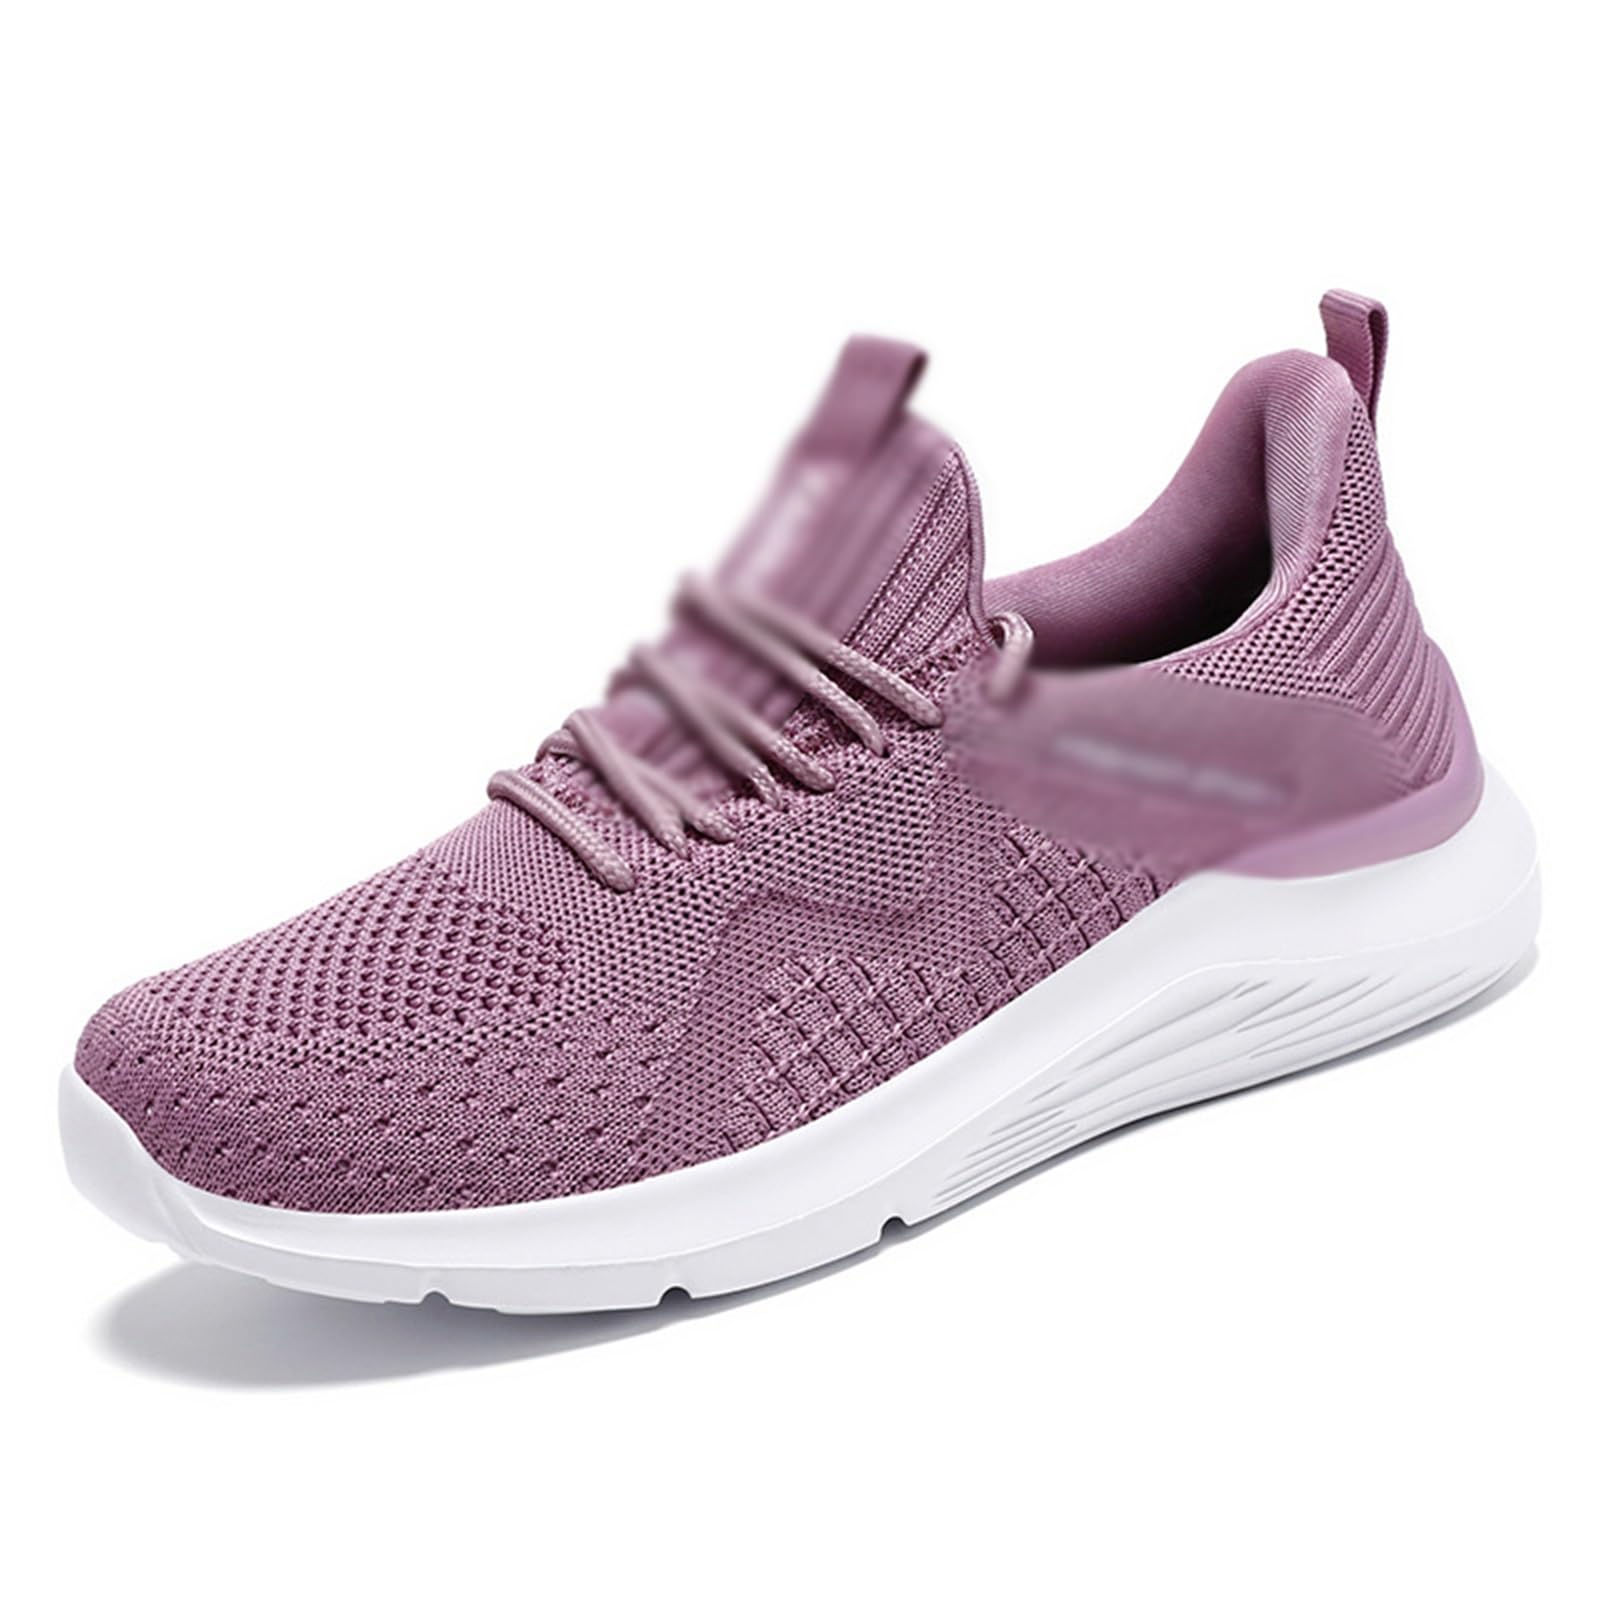 Women's athletic shoes - EYE COLOR INSPIRED APPAREL, HOME DECOR & MORE MADE  ESPECIALLY FOR YOU!